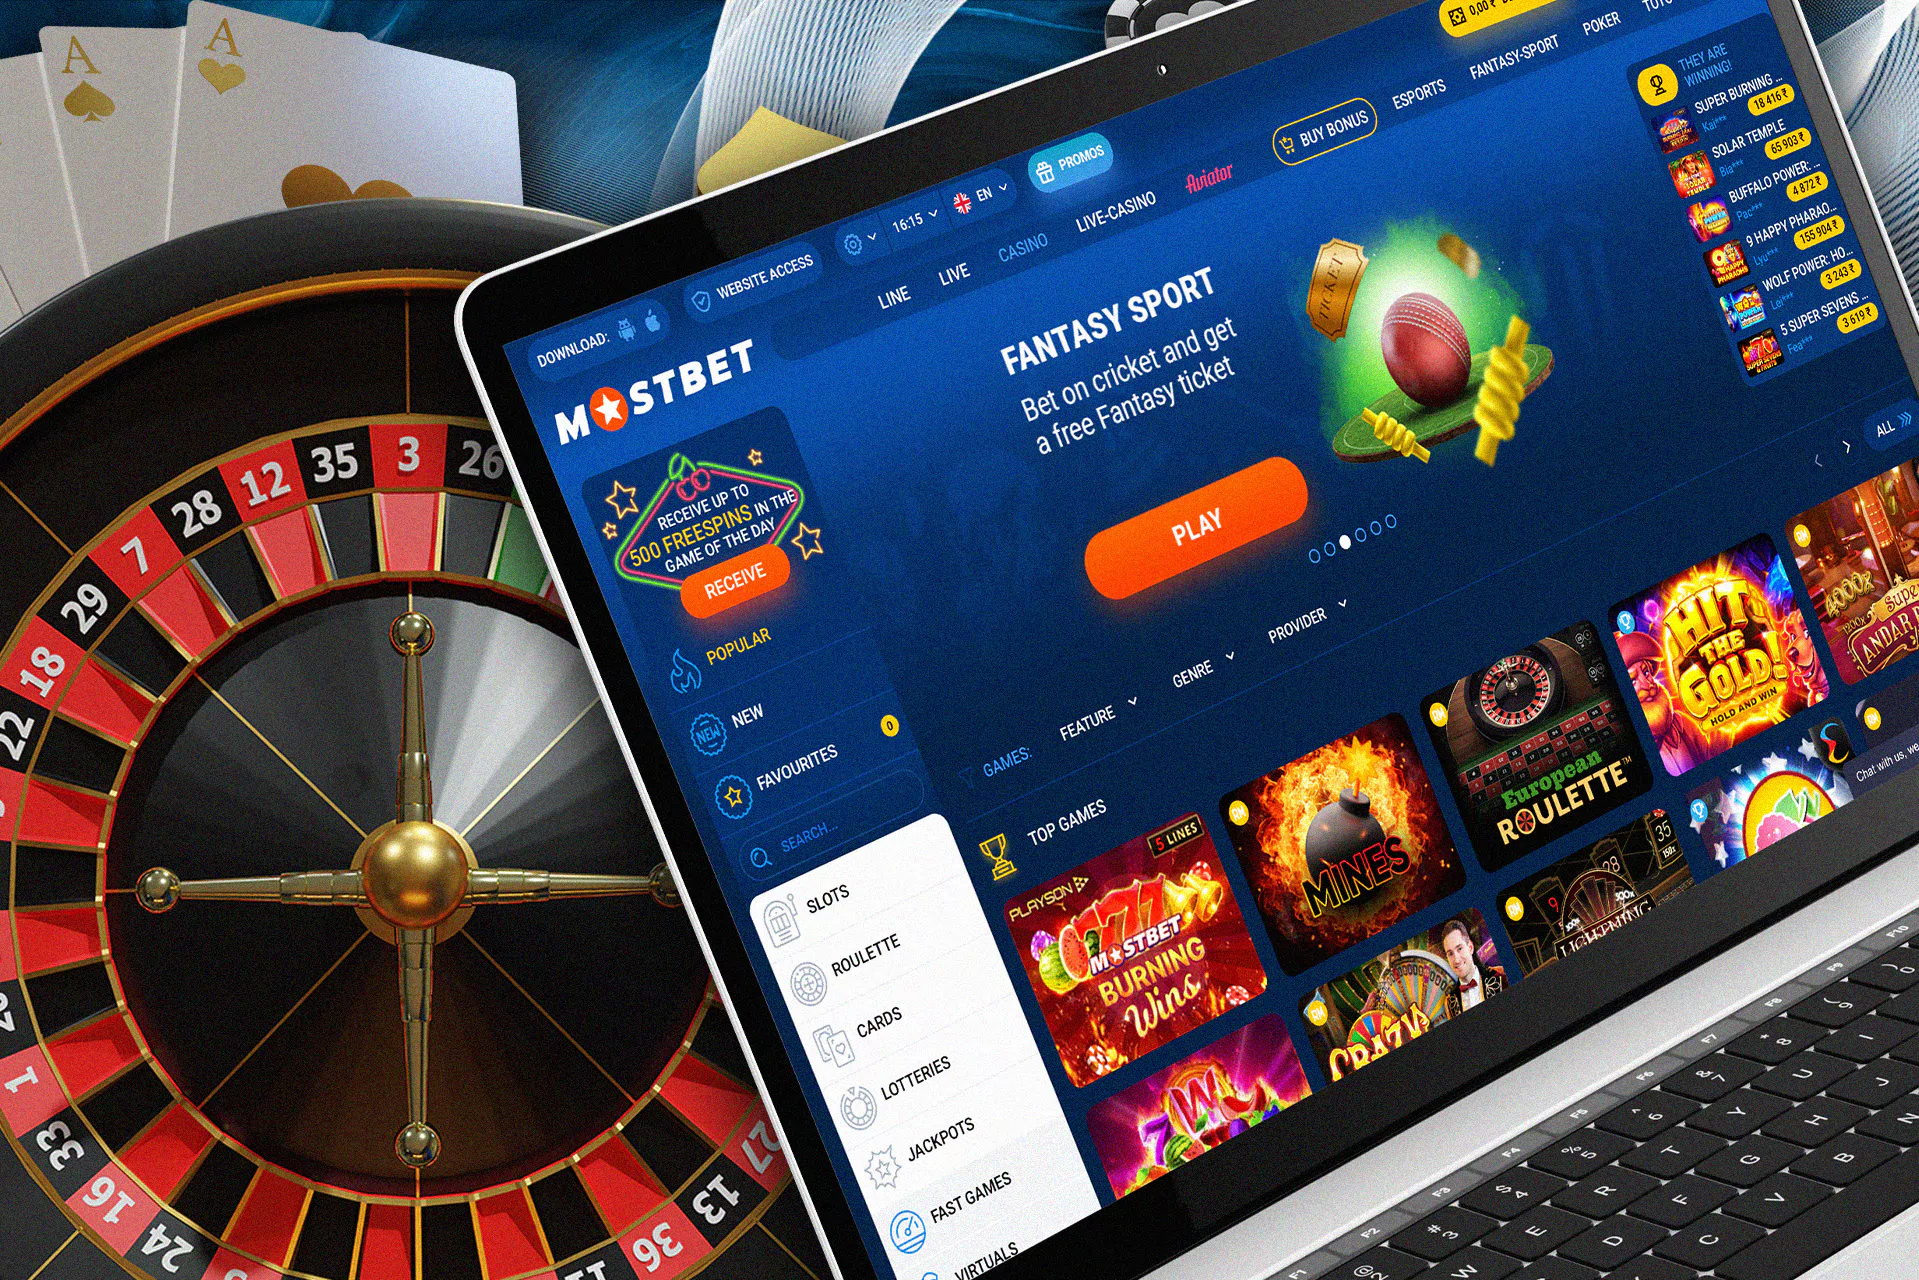 All possibilities for entertainment in the casino section of Mostbet.